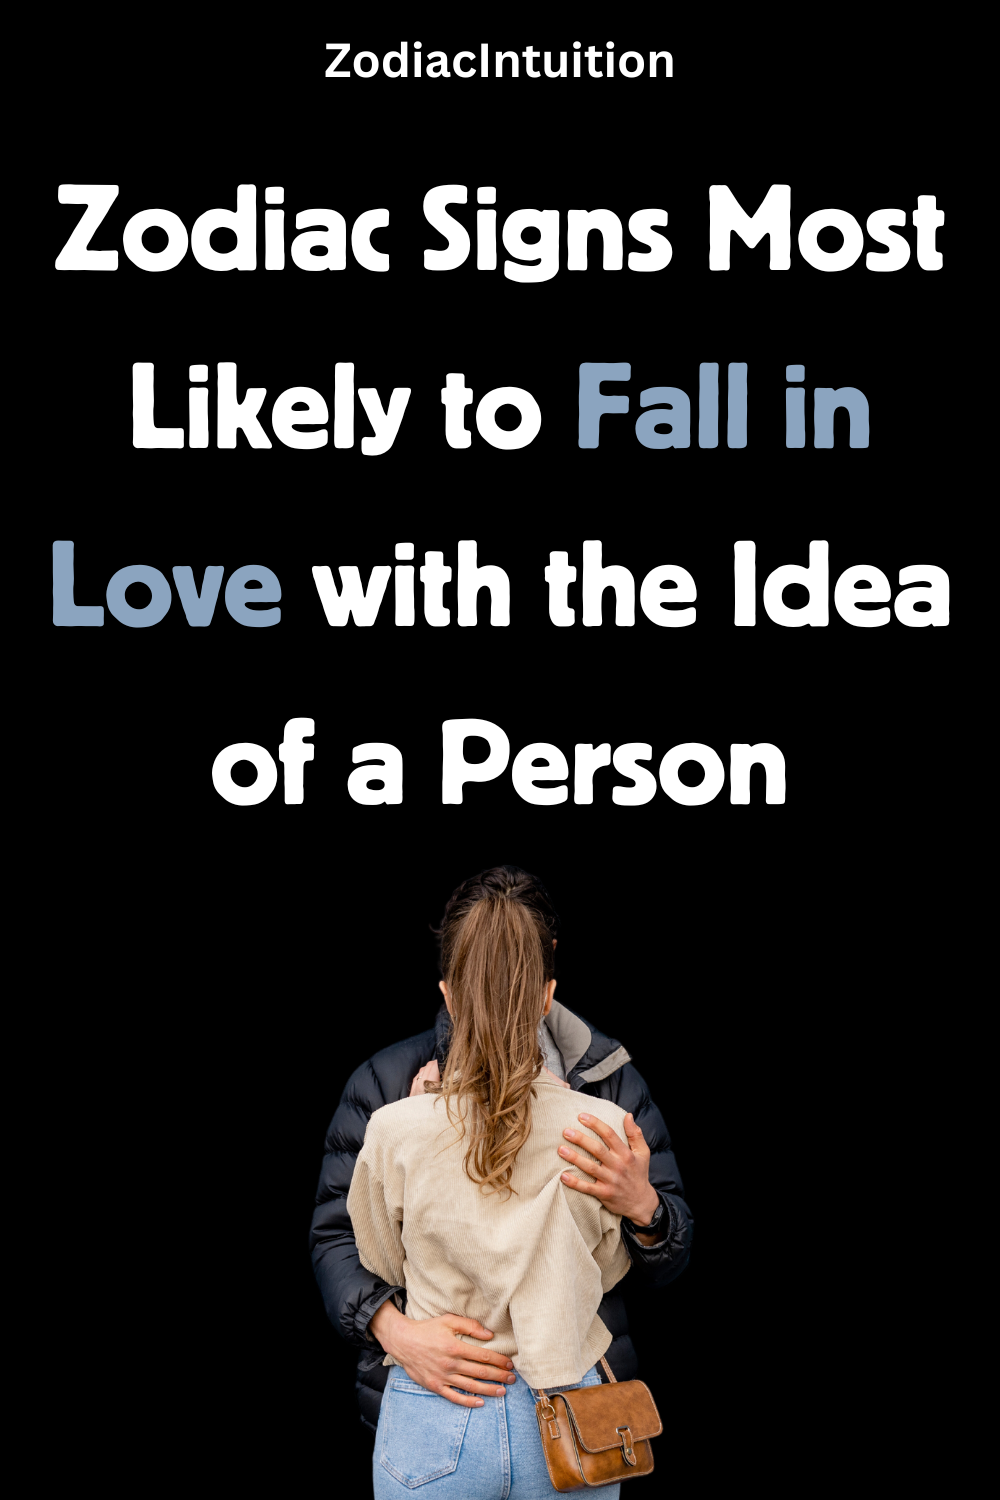 Zodiac Signs Most Likely to Fall in Love with the Idea of a Person